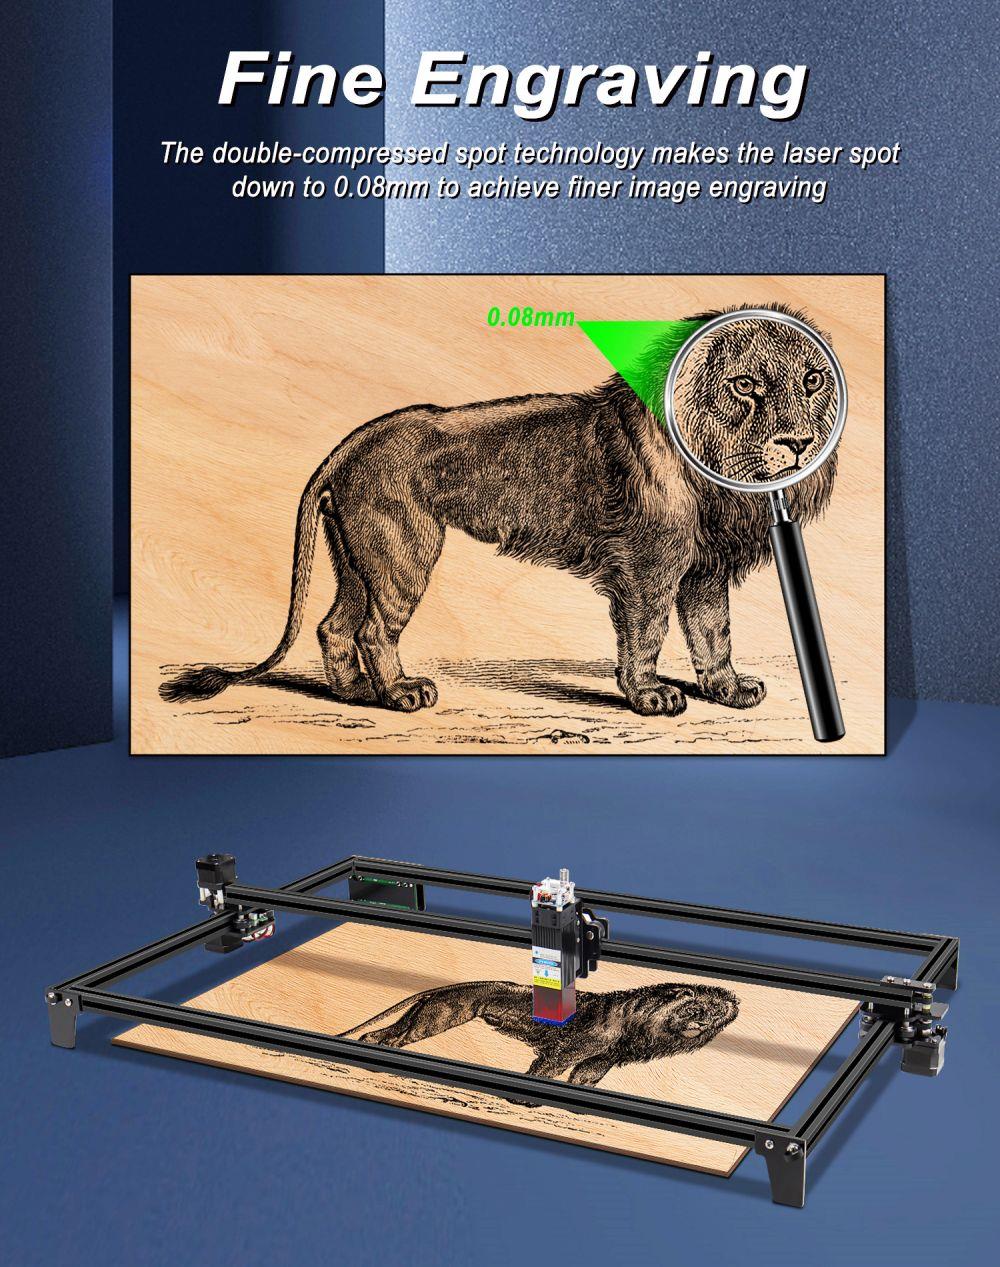 ZBAITU M81 10W CNC Laser Engraver, 0.08mm Compressed Spot, Focus Free, Offline Engraving, Cuts 10mm Wood in One Pass, 460*810mm